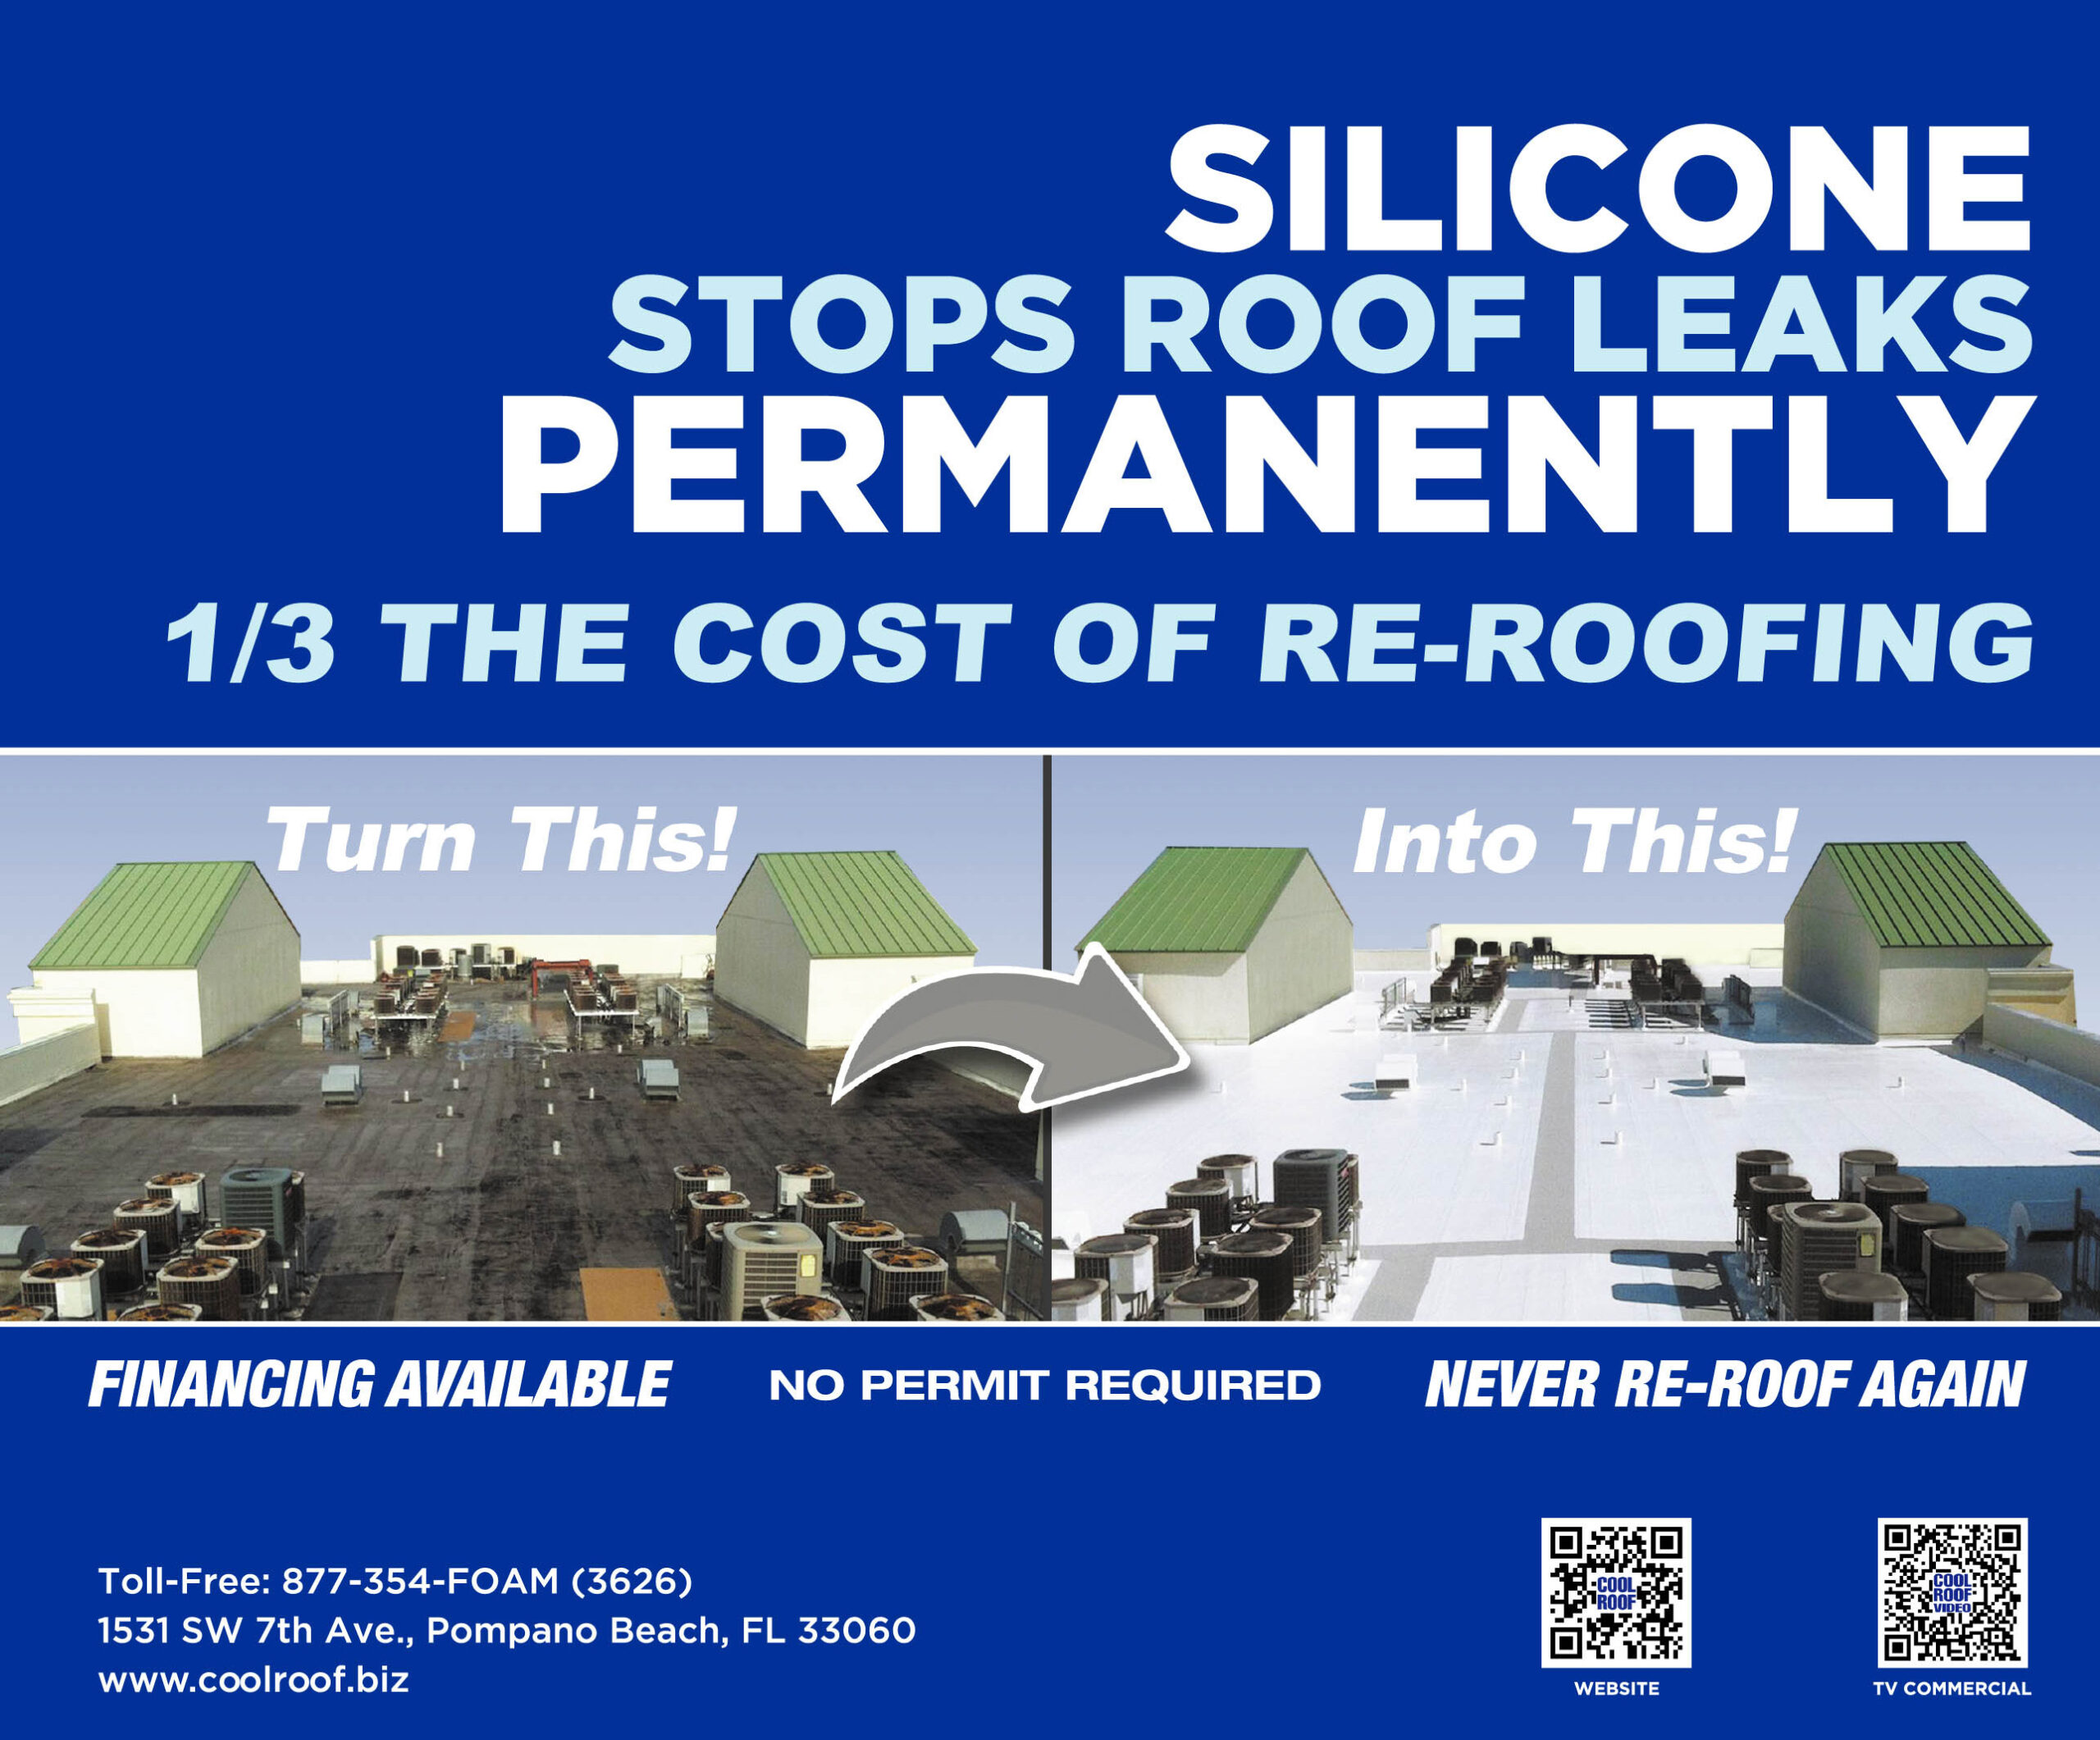 Silicone Roof Restoration - Cool Roof Foam & Coatings - Roof Coatings - Top Rated Commercial Roofer